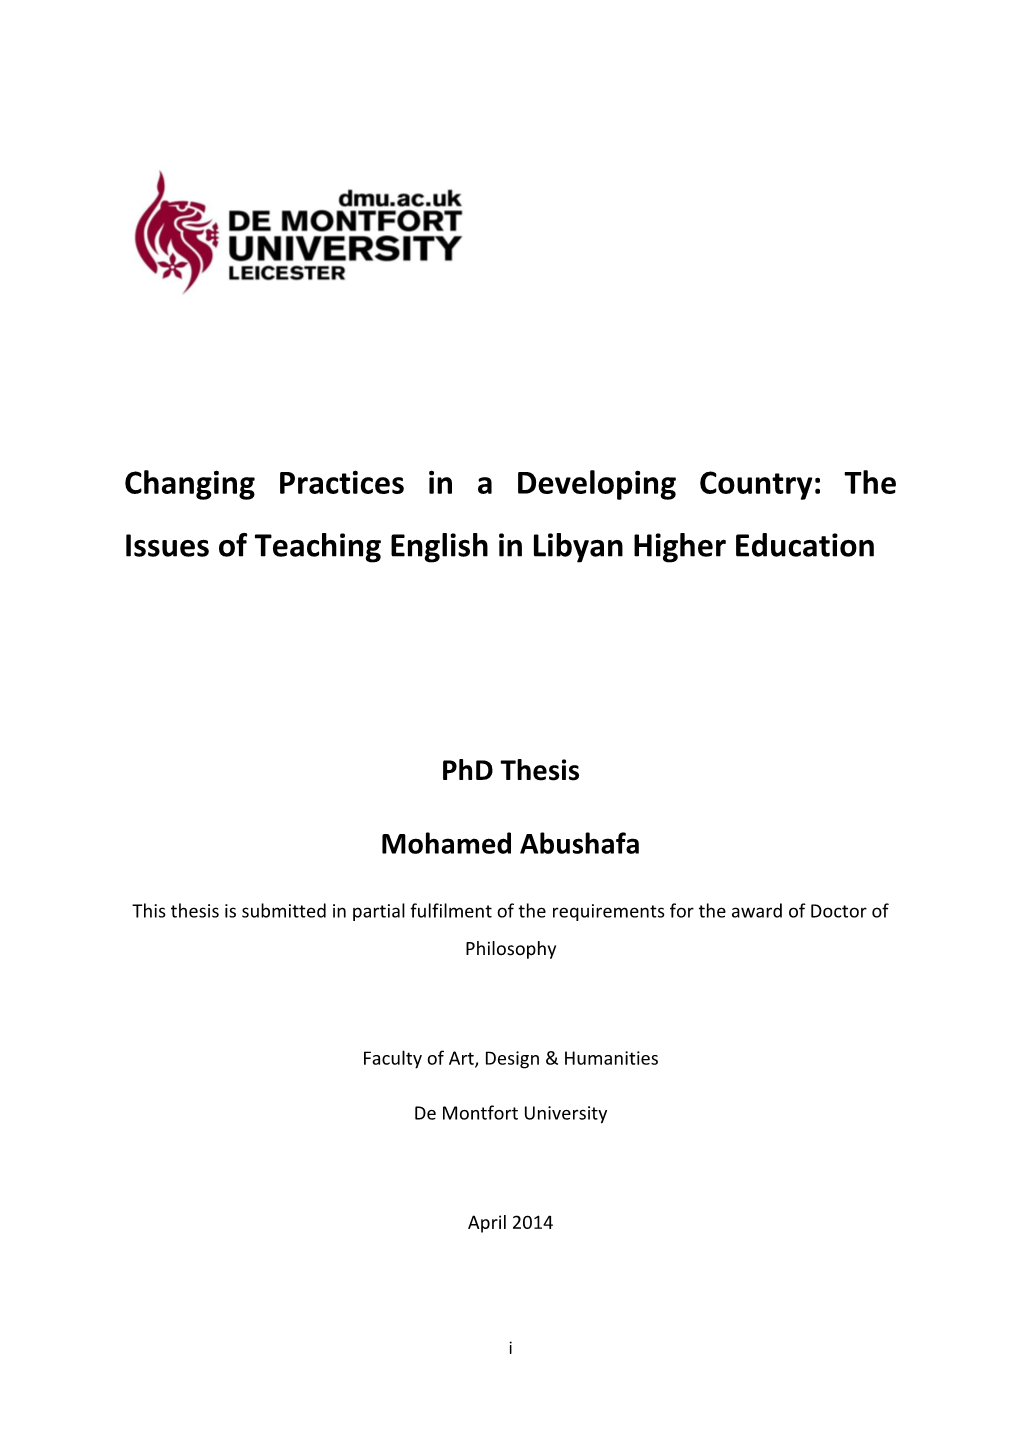 The Issues of Teaching English in Libyan Higher Education